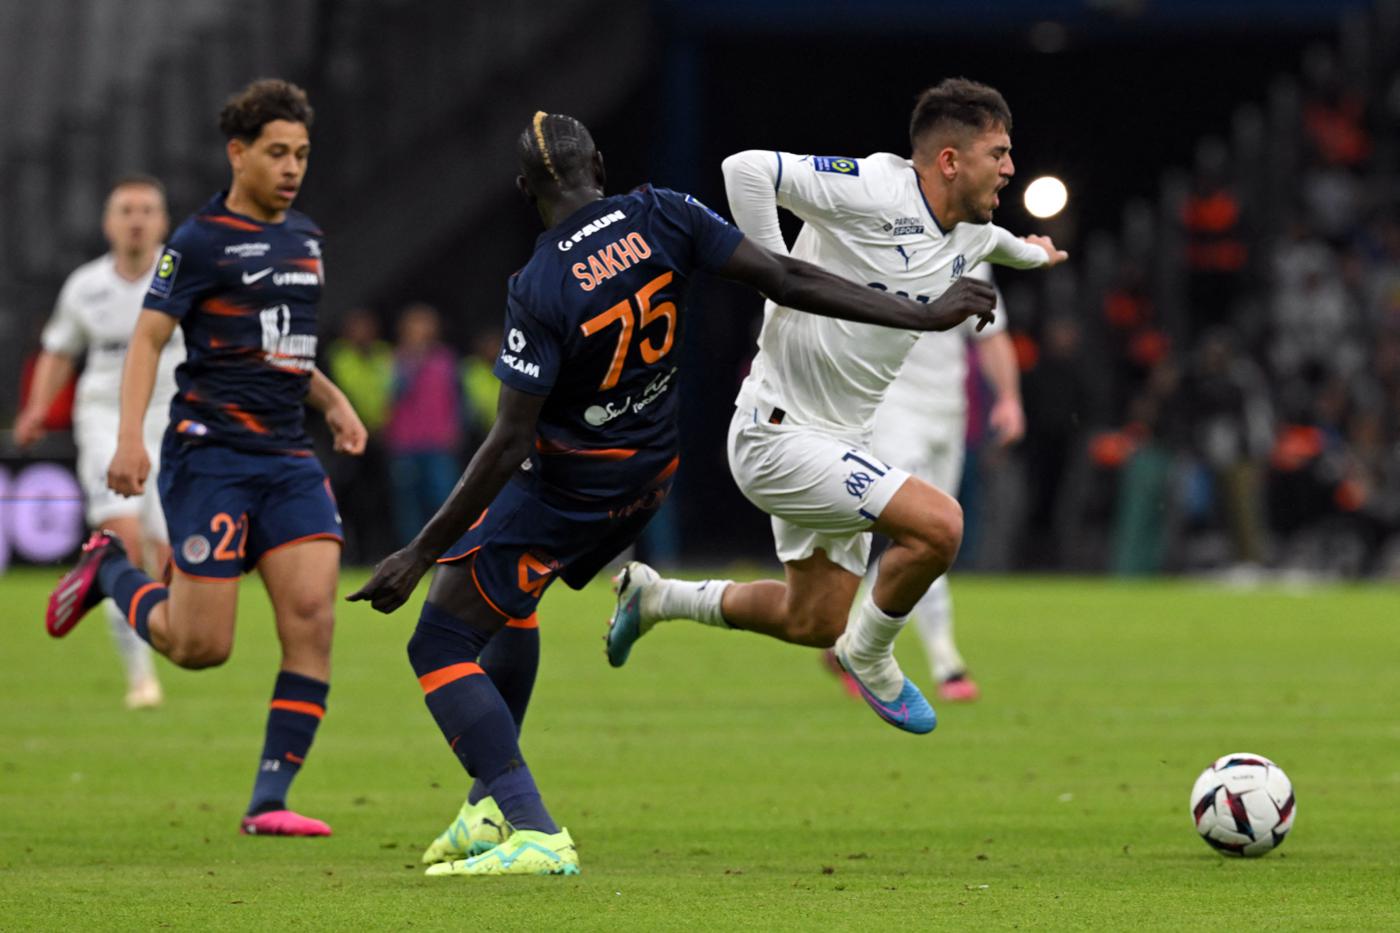 Marseille - Montpellier - 1:1. French Championship, 29th round. Match review, statistics